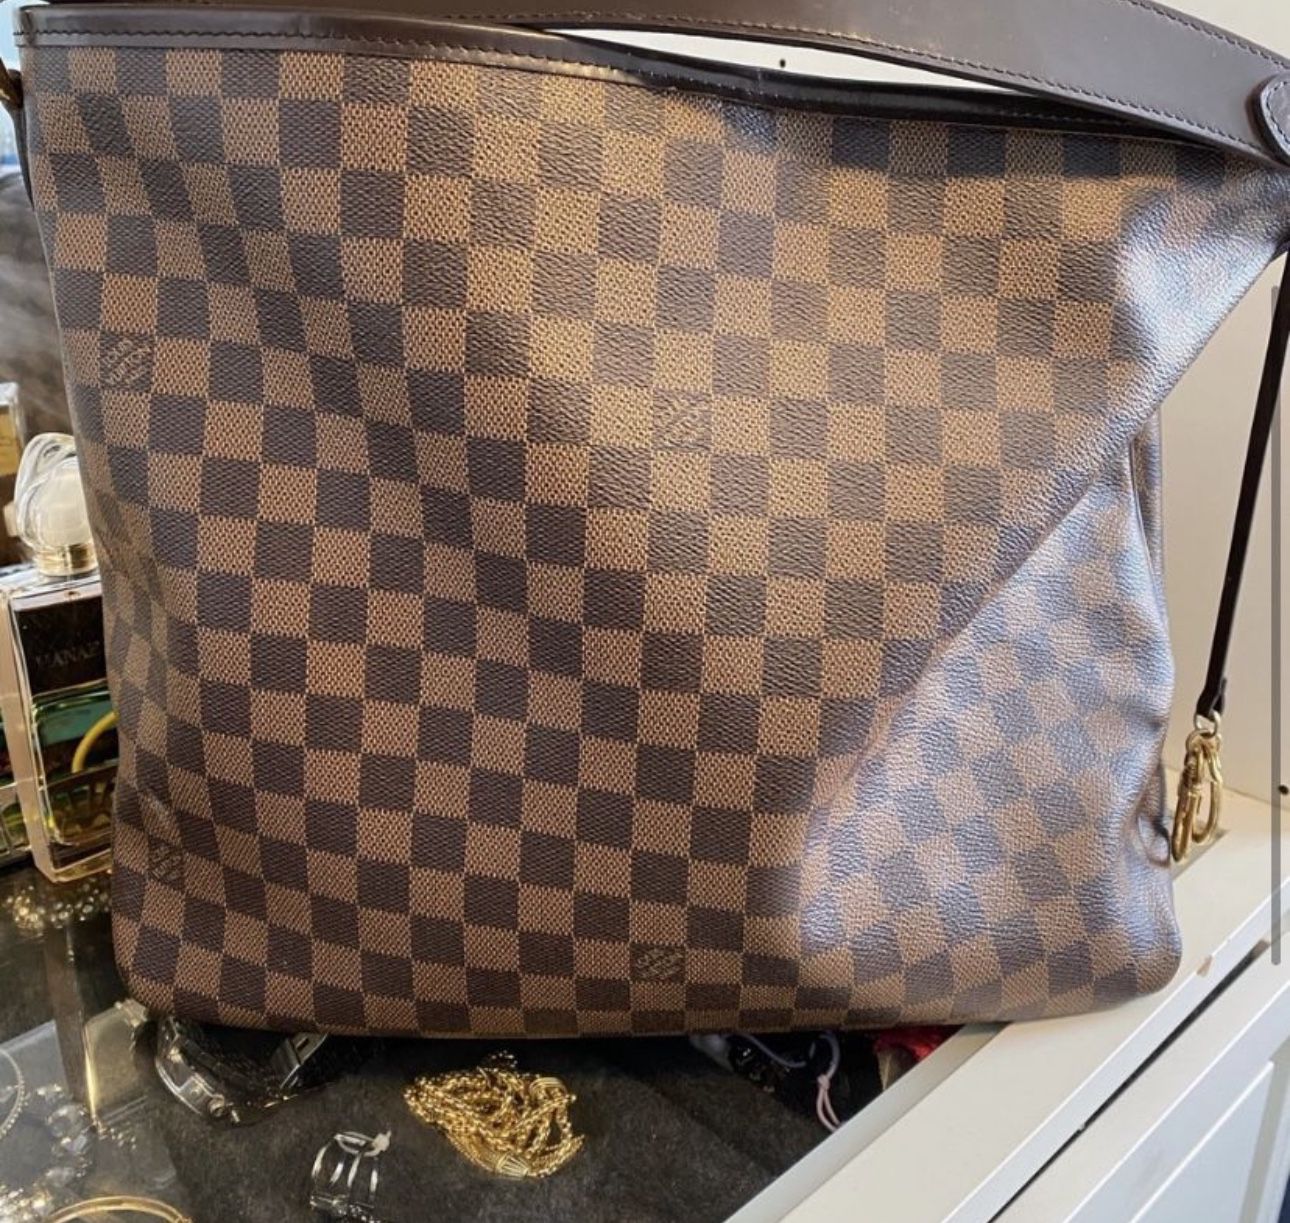 Louis Vuitton Carrying Bag Replica for Sale in Bowie, MD - OfferUp